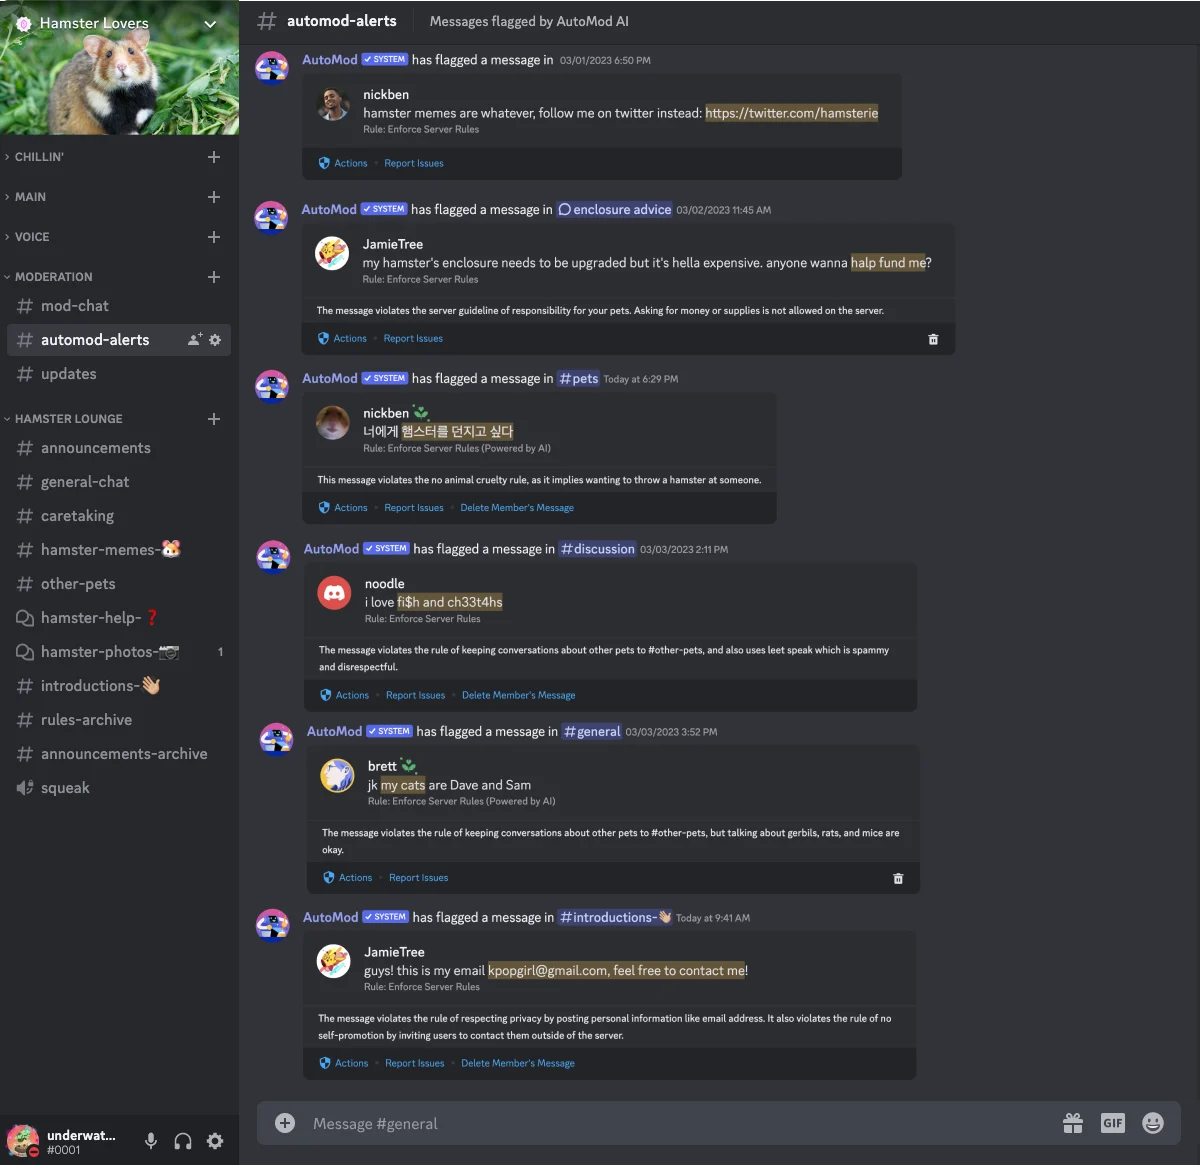 AutoMod screenshot, showing the tool's new ability to enforce server rules.